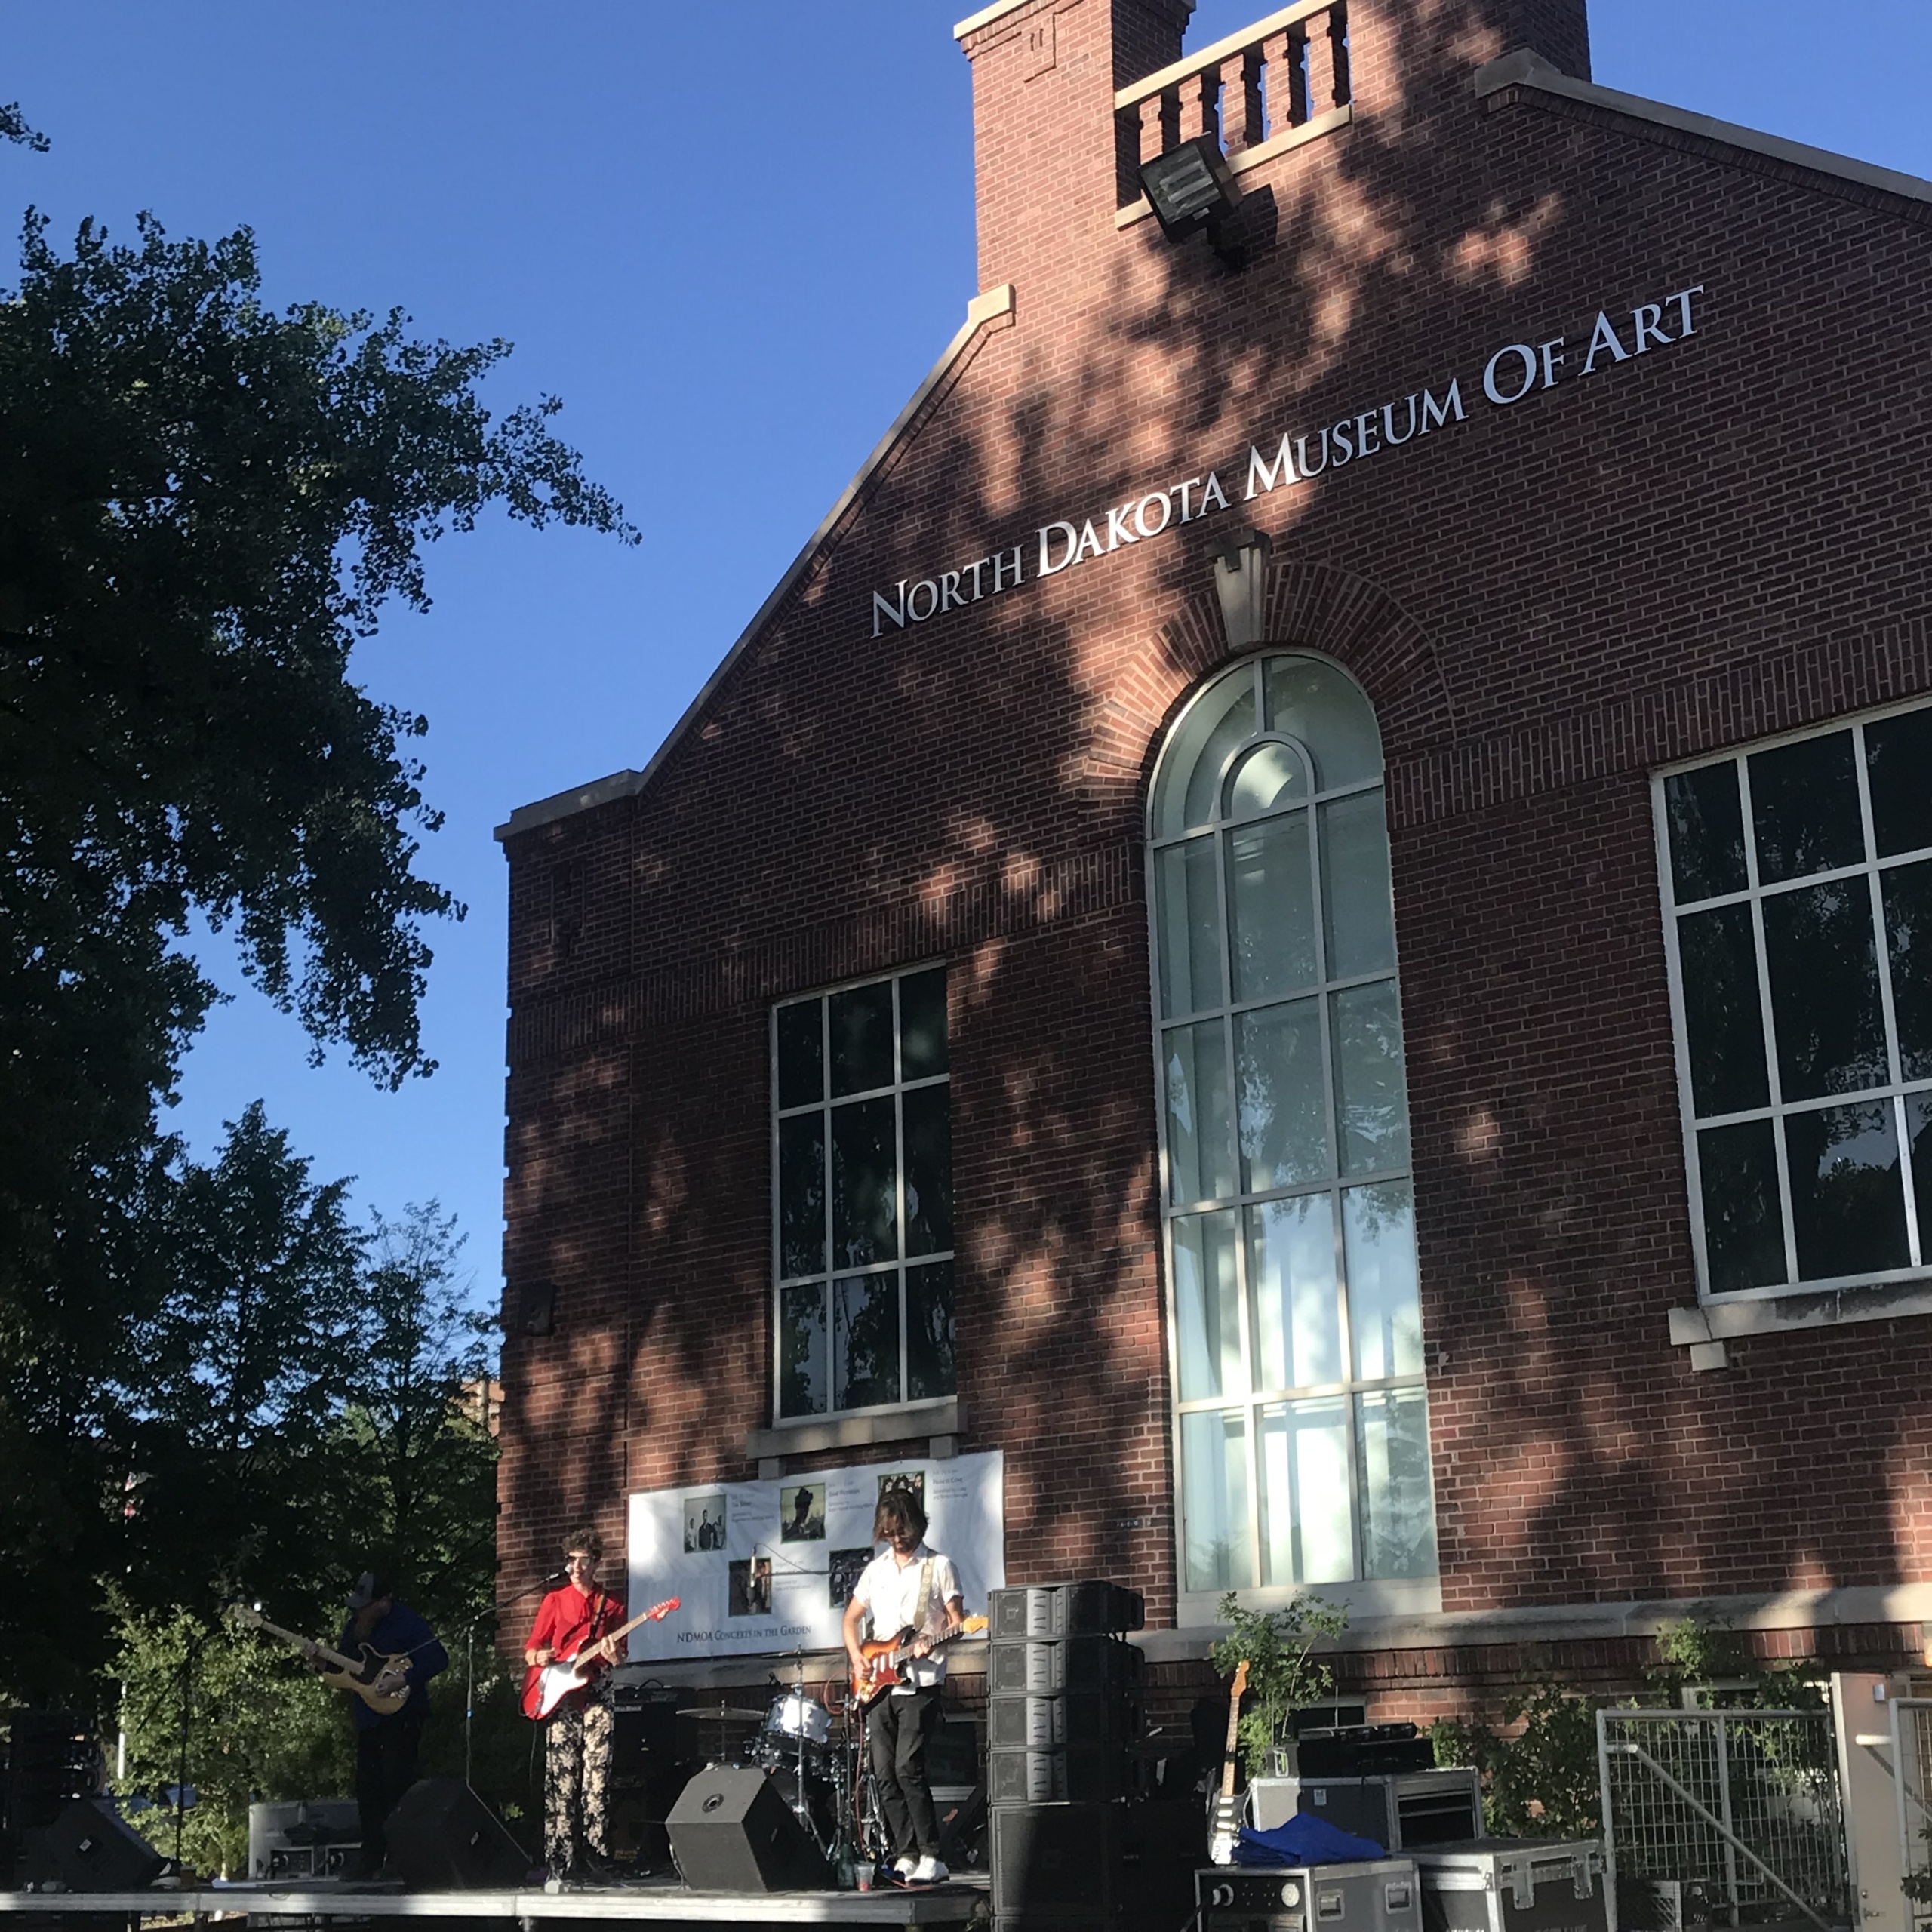 A small band plays on a stage outside of the North Dakota Museum of Art, a large, brick building.